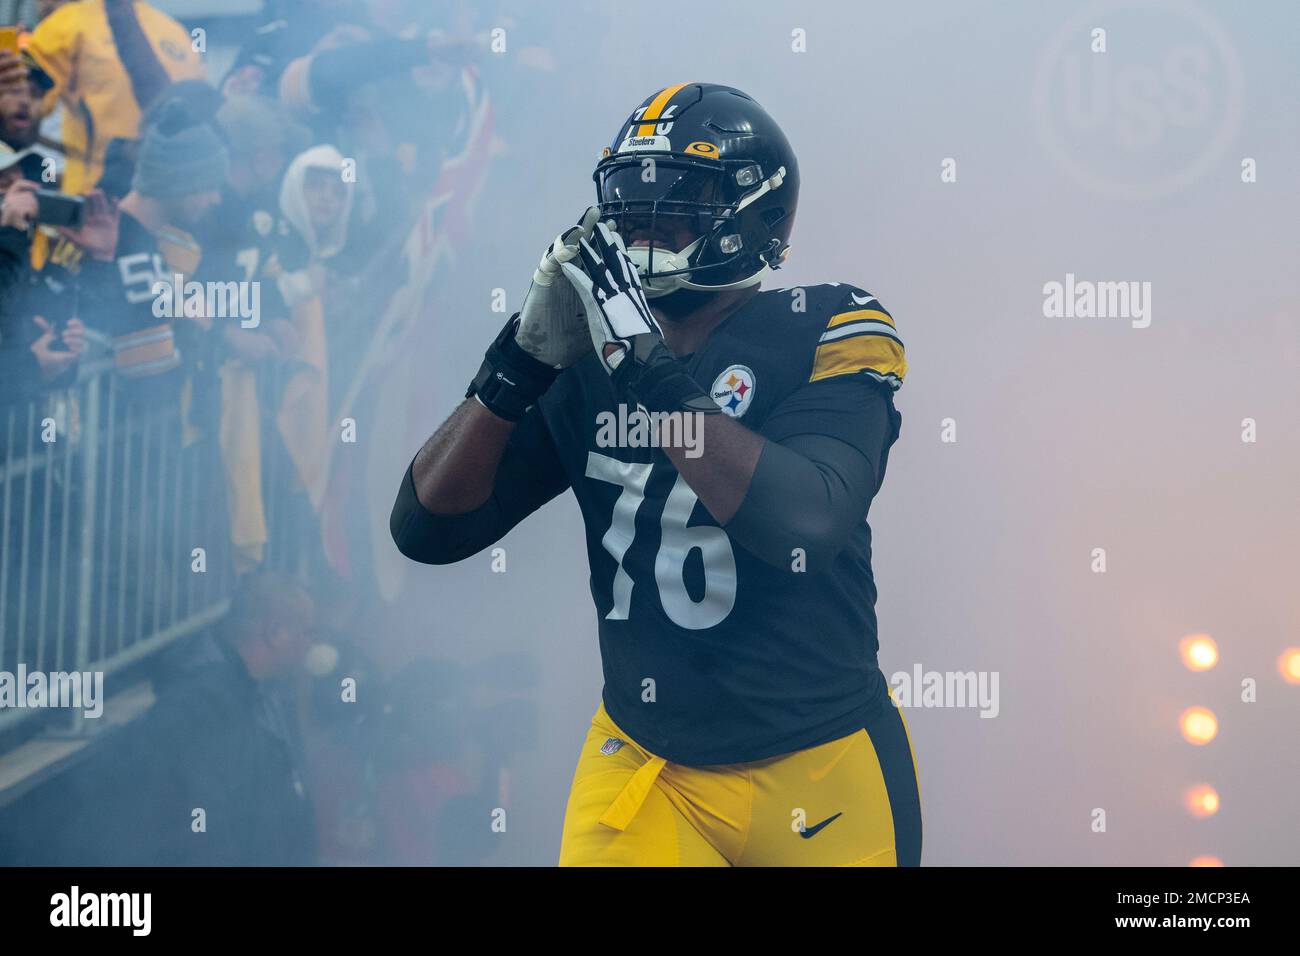 Pittsburgh Steelers offensive tackle Chukwuma Okorafor (76) takes the field before an NFL football game against the Baltimore Ravens, Sunday, Dec